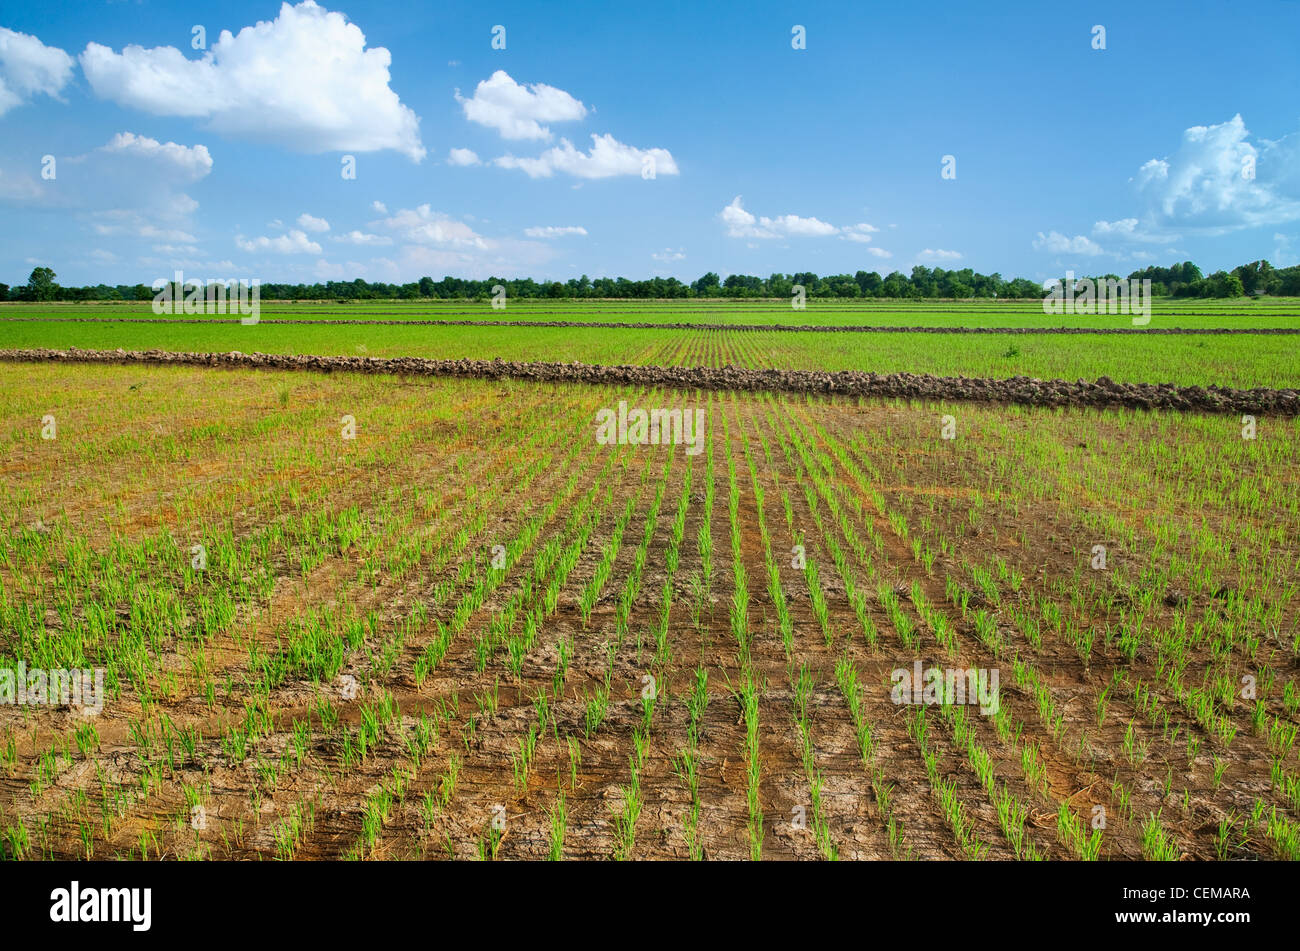 Agriculture - Early growth rice field with the plants at the 4-6 leaf stage / near England, Arkansas, USA. Stock Photo